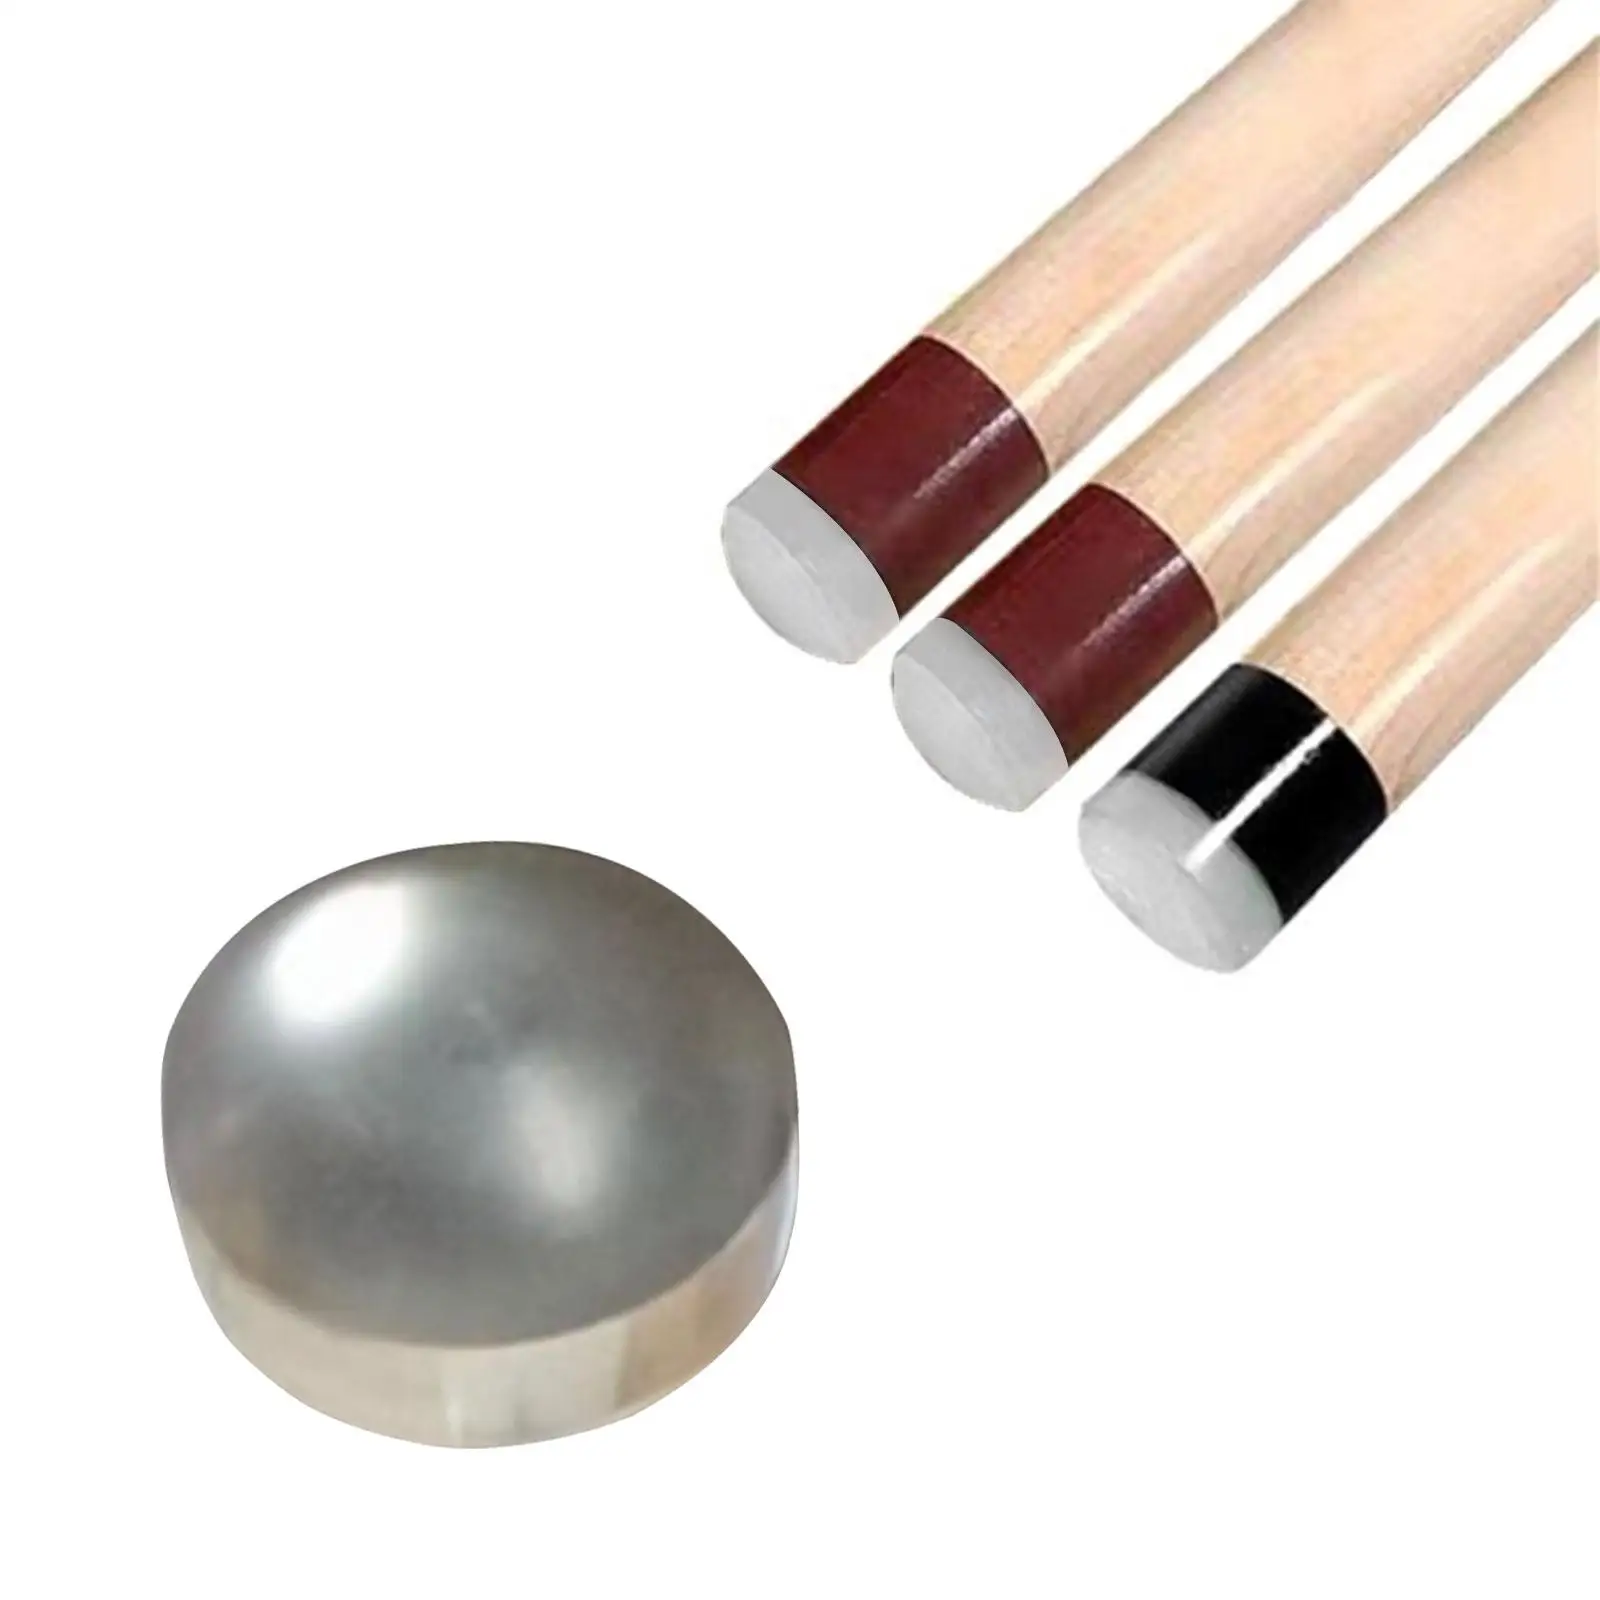 Billiard Pool Cue Tip 13mm Snooker Cue Tip Cue Accessory High Hardness Billiards Cue Tip for Indoor Pool Cues Billiards Players